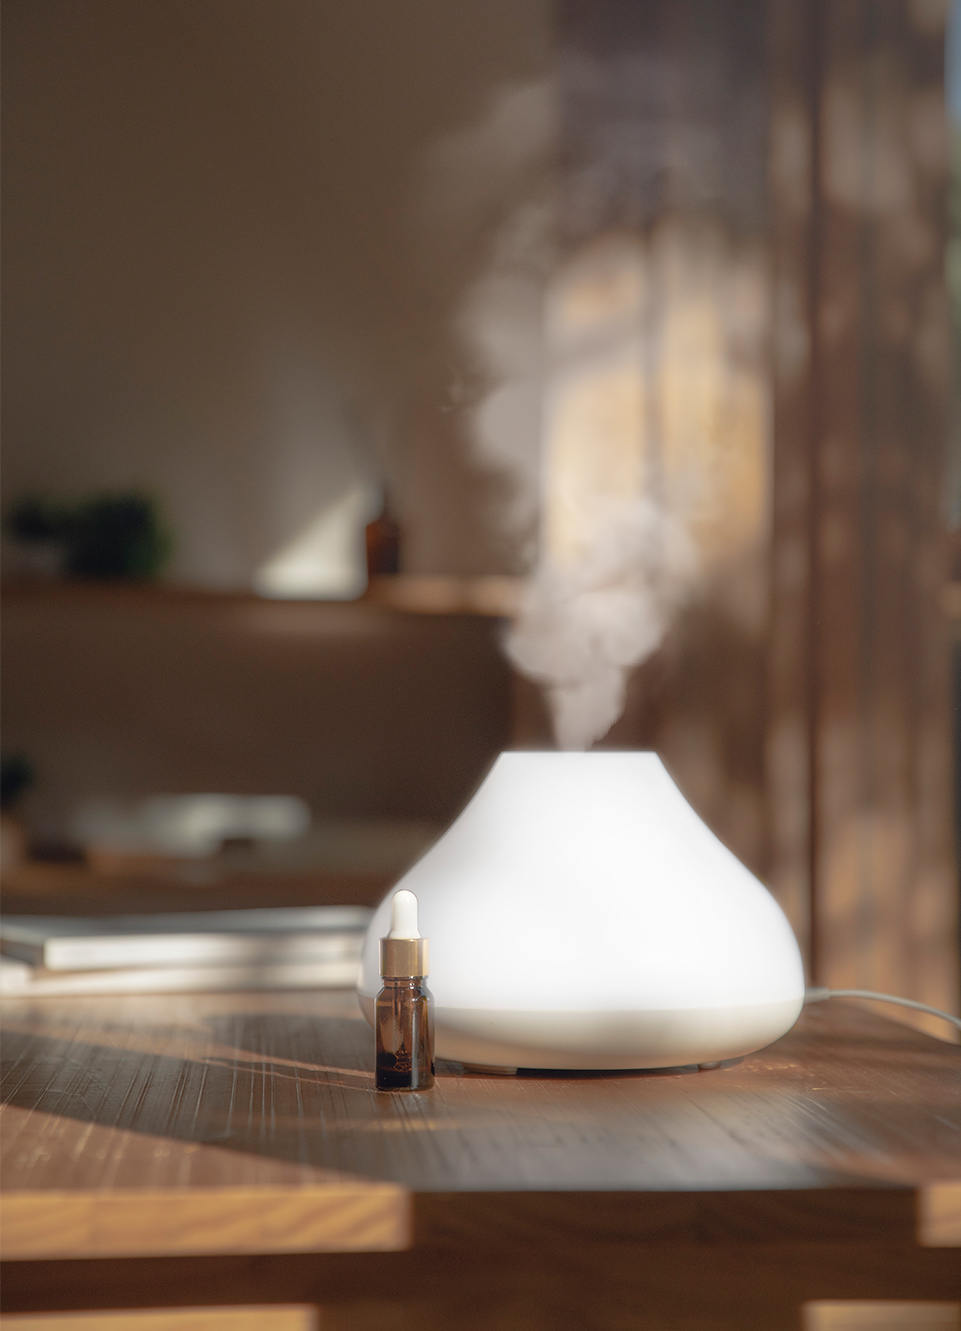 H7-HumIdifier images